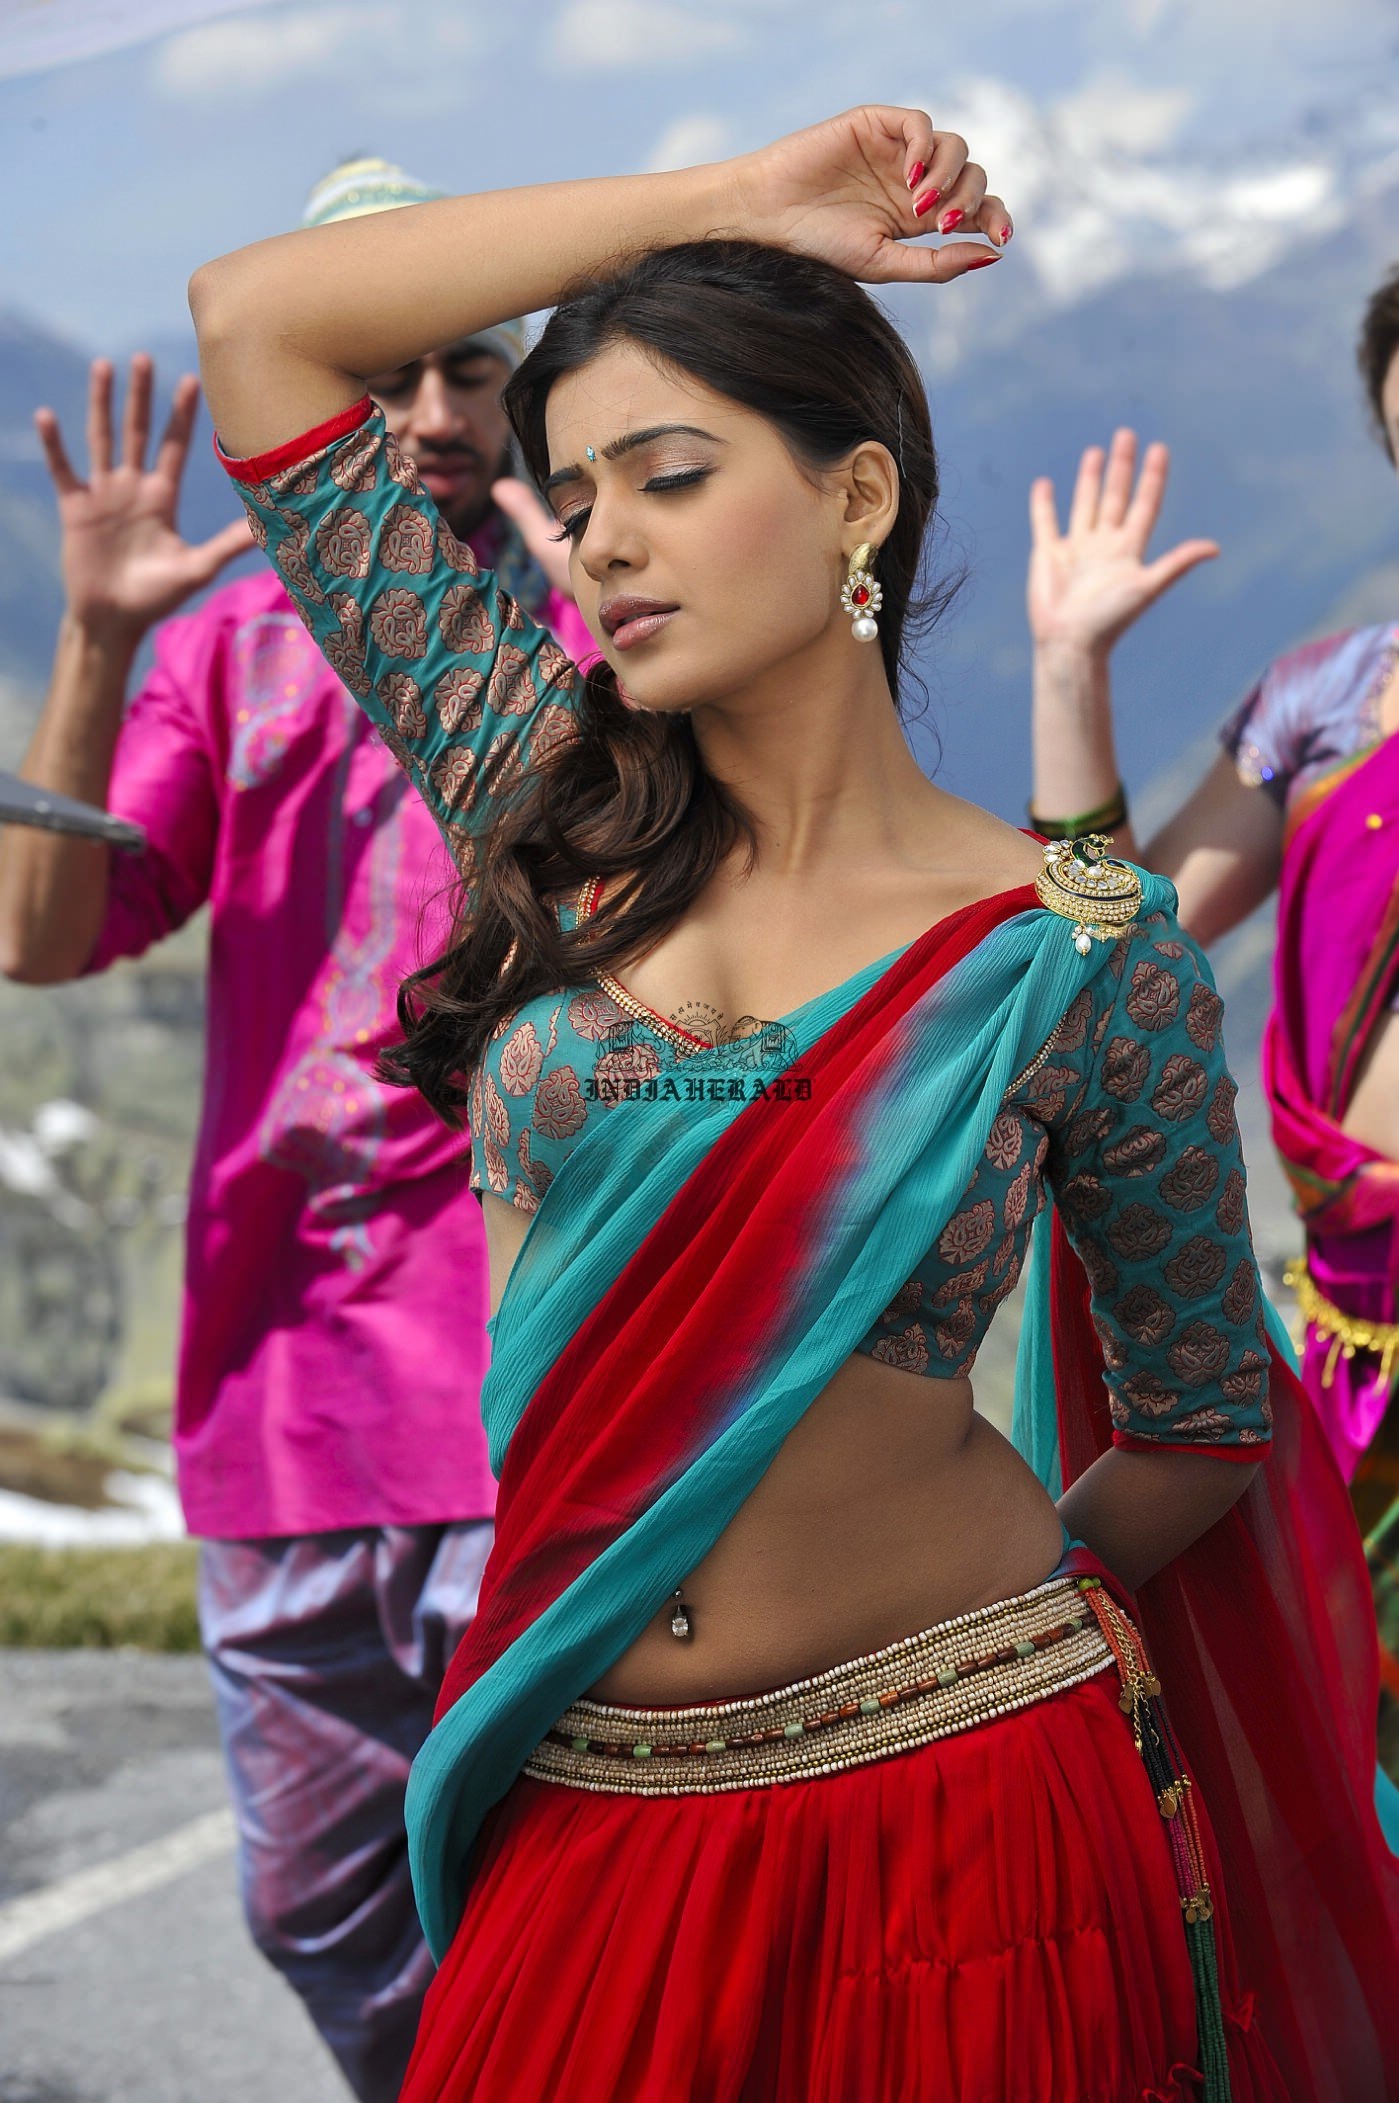 Samantha shows horny expressions on face and exposes her navel and hip curves Set 1